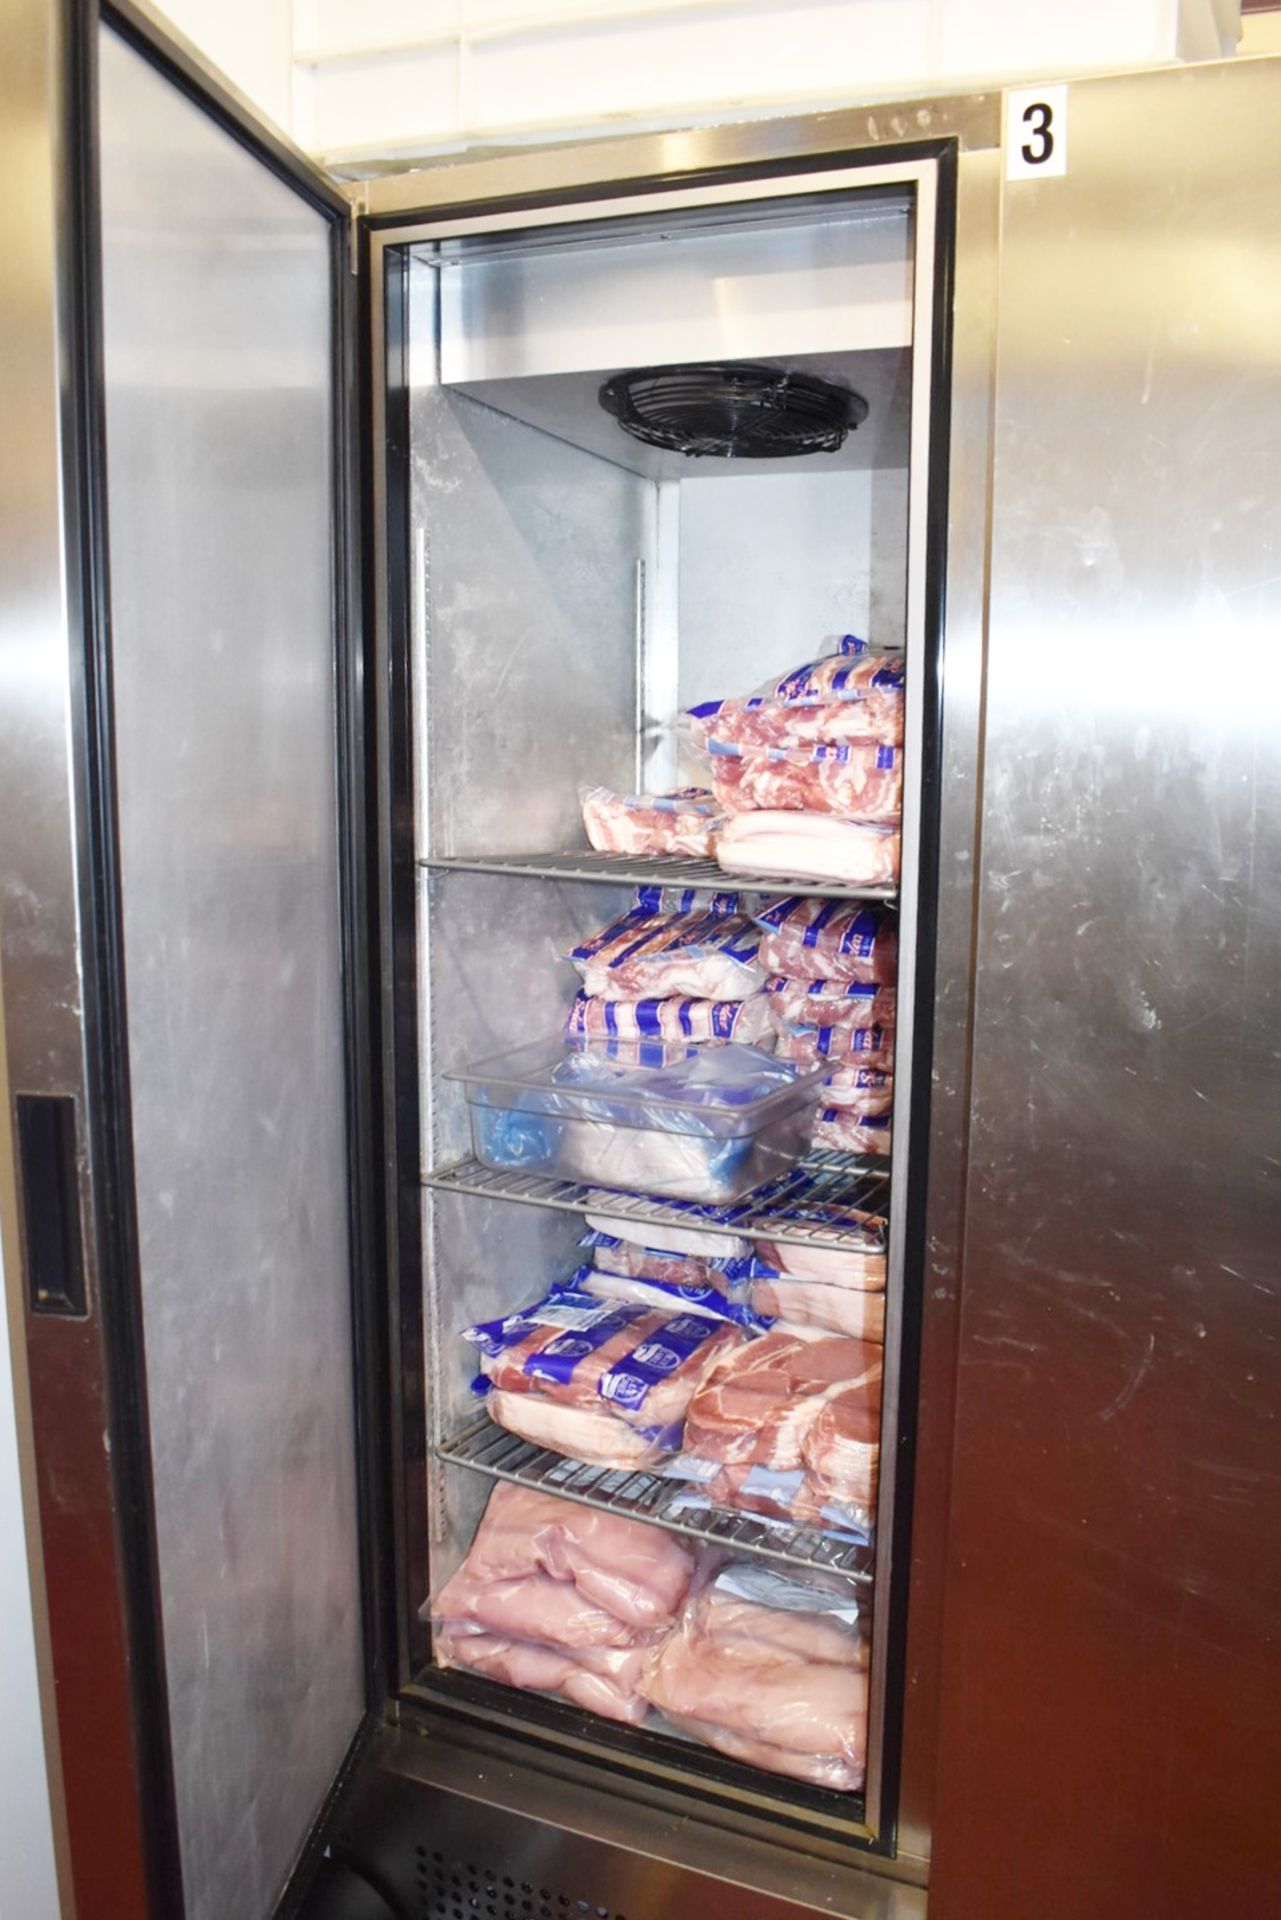 1 x Foster 800 Litre Double Door Meat Fridge With Stainless Steel Finish - Model FSL800M - H188 x - Image 5 of 8